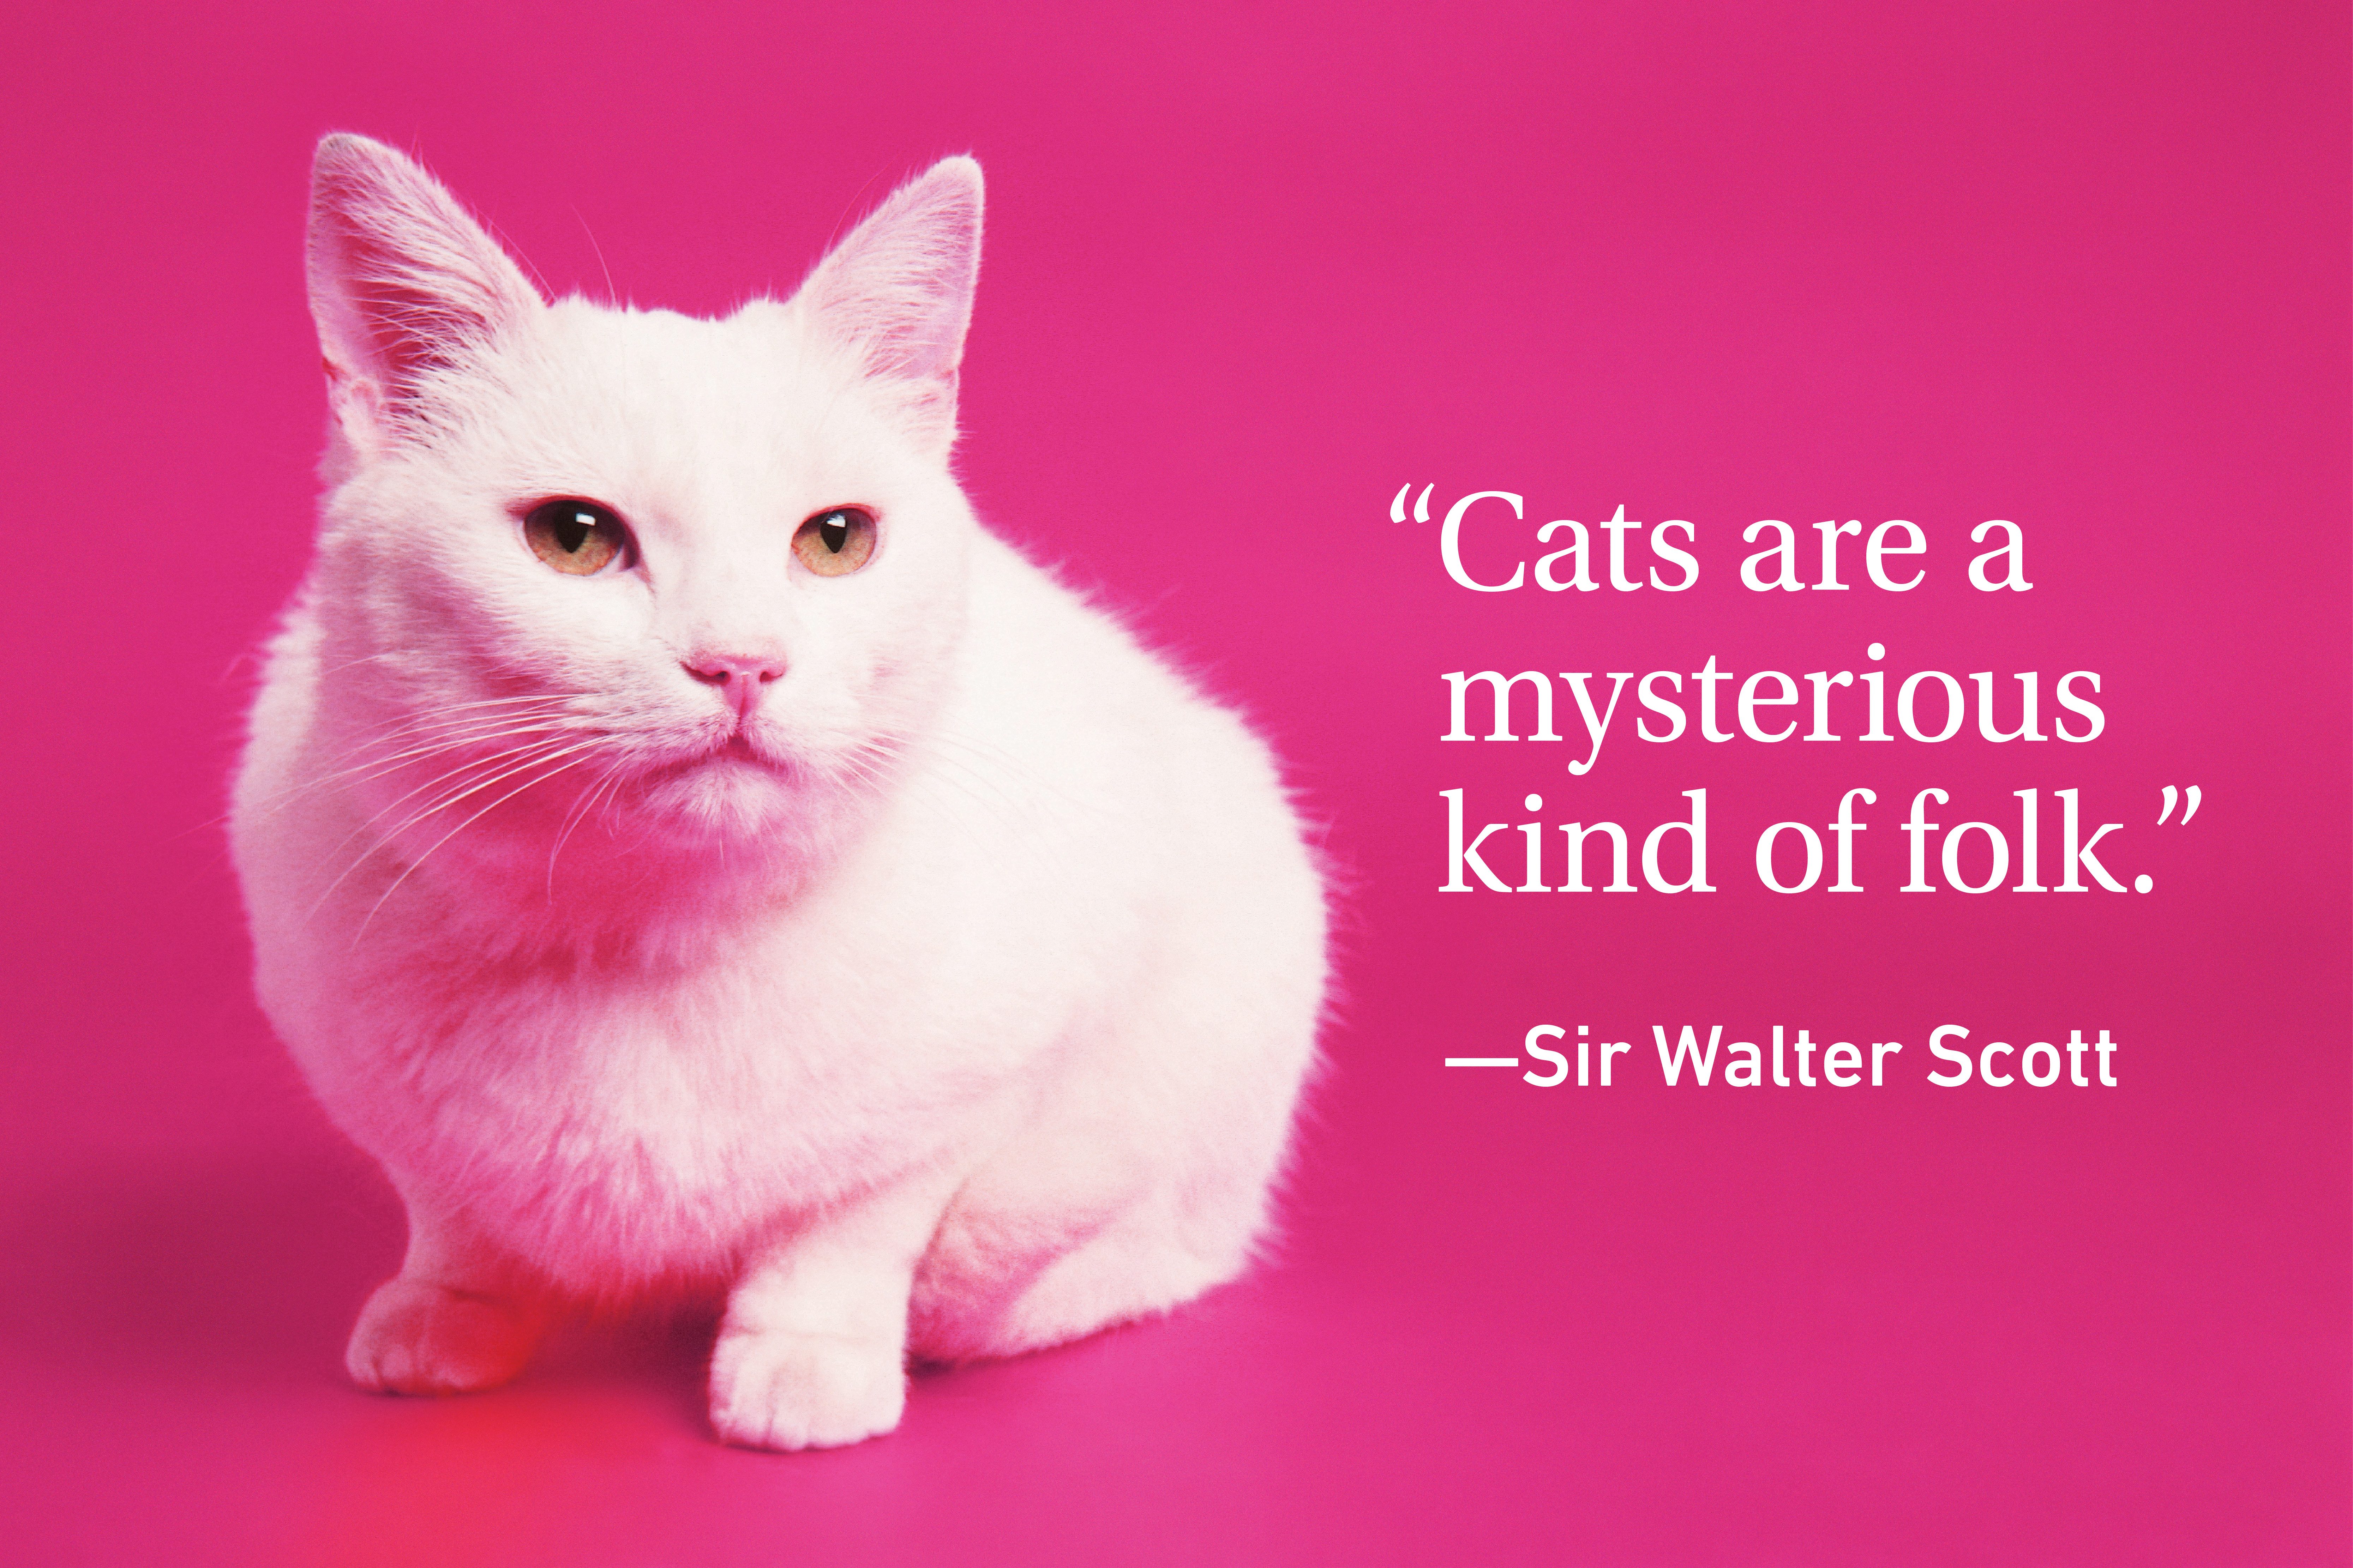 Cat on magenta background with a cat quote